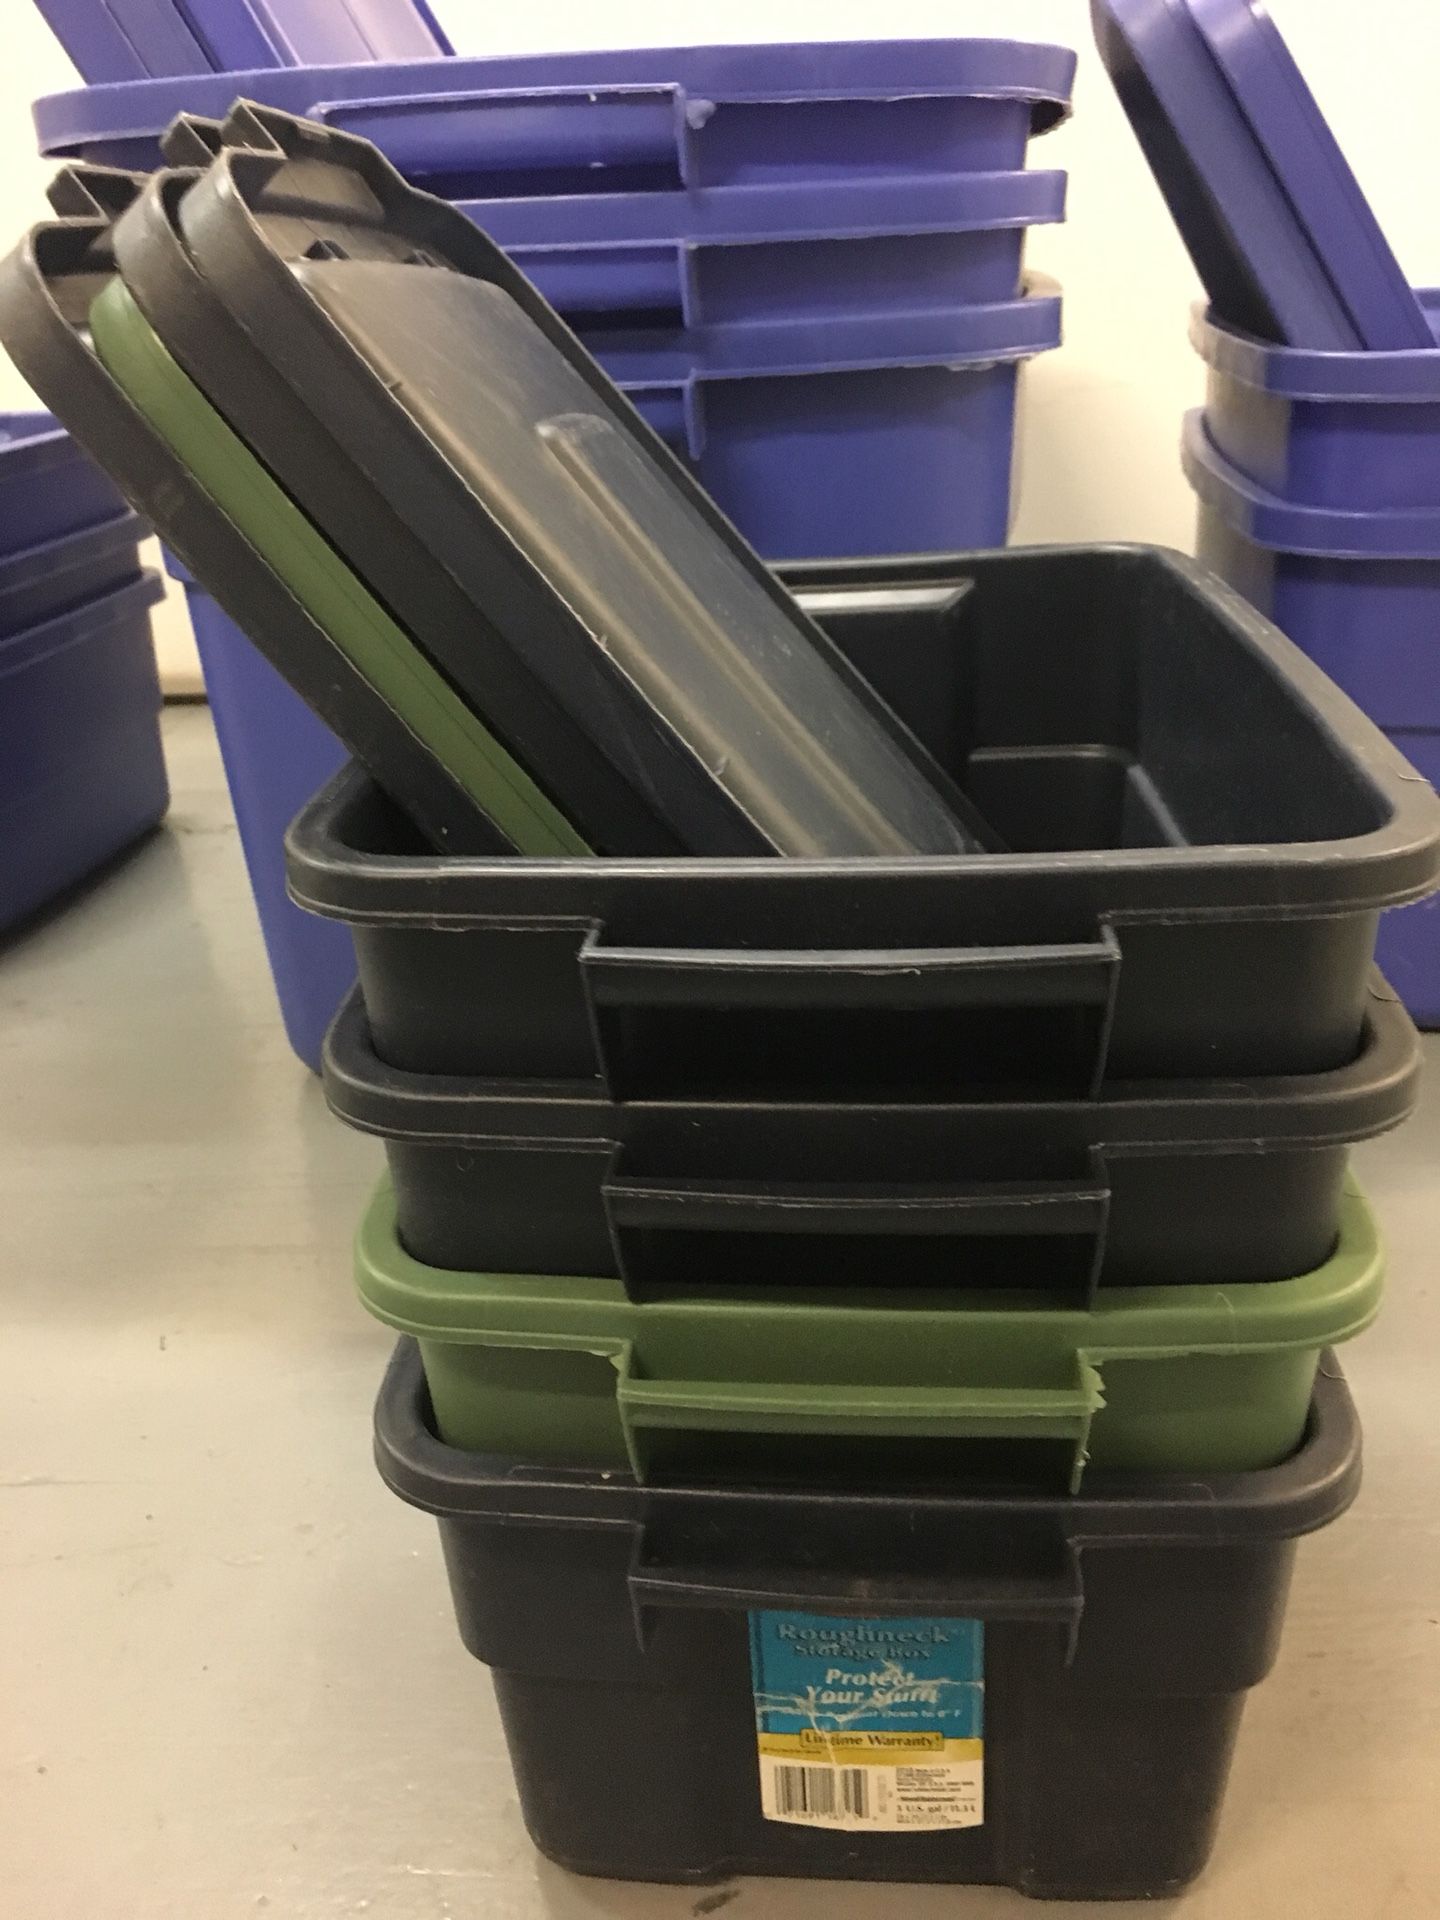 Storage containers various sizes by Rubbermaid